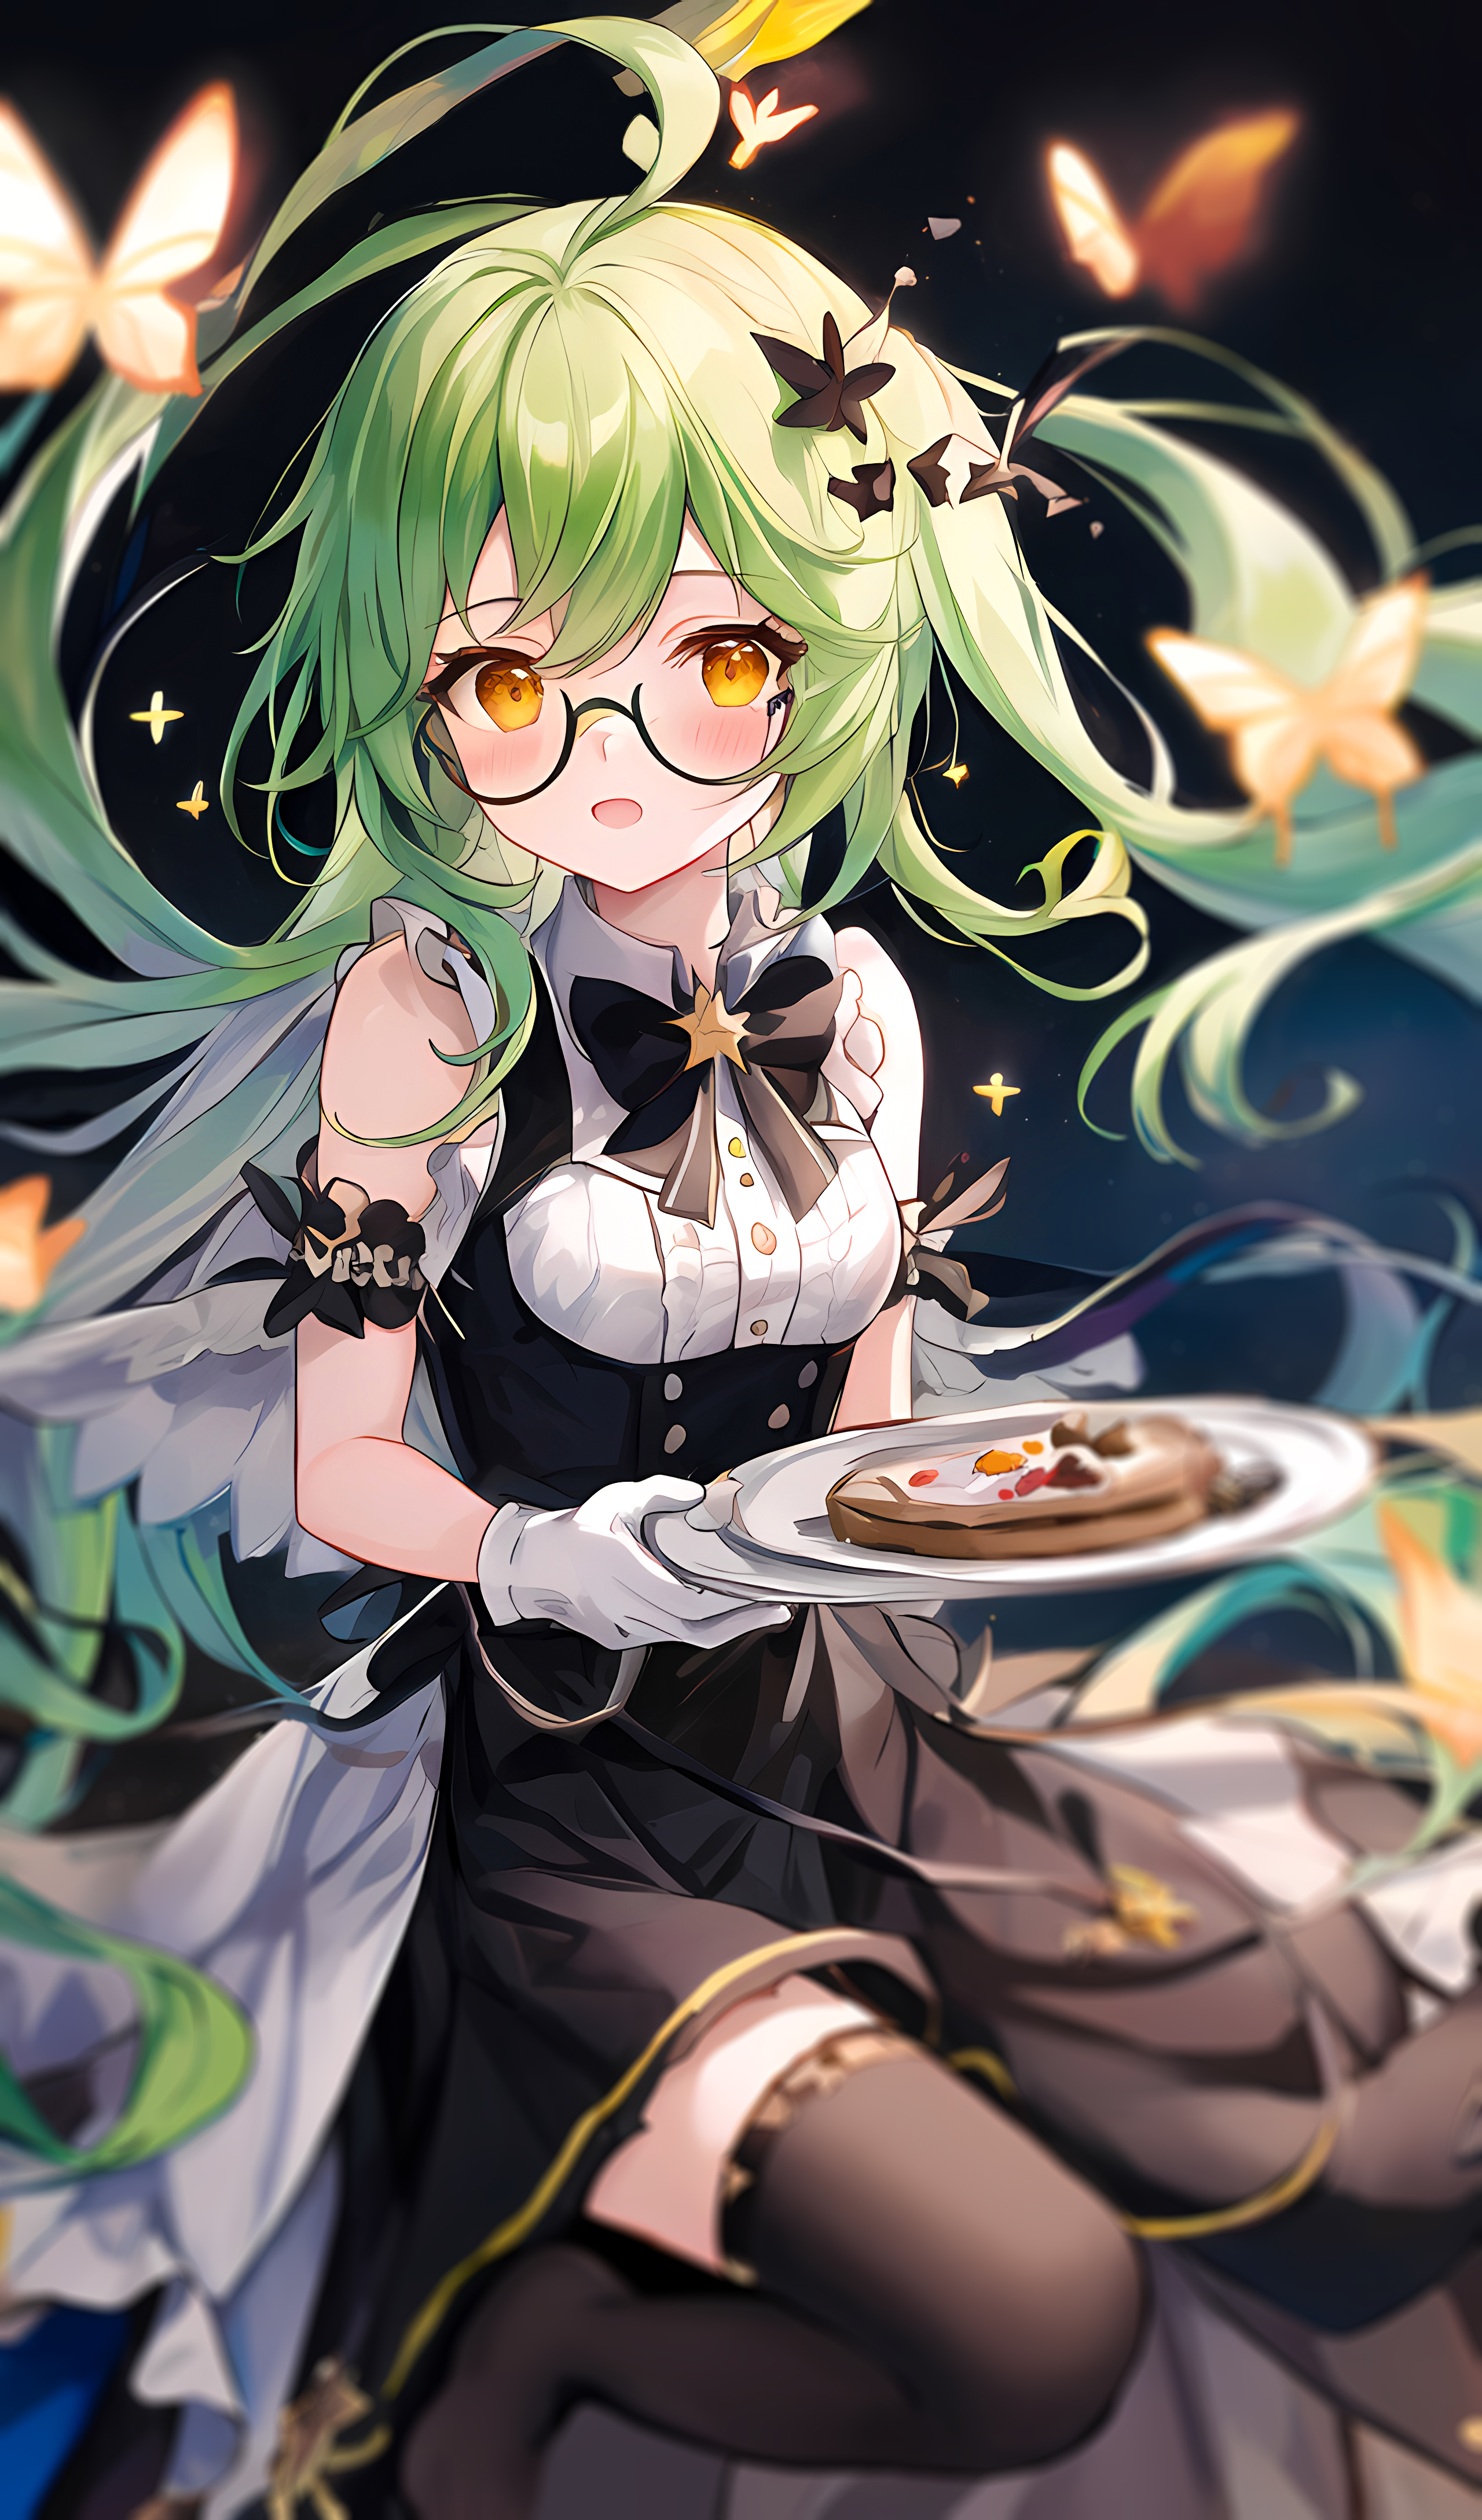 Anime 2560x4352 anime girls Genshin Impact Sucrose (Genshin Impact) portrait display gloves glasses food stockings butterfly maid maid outfit